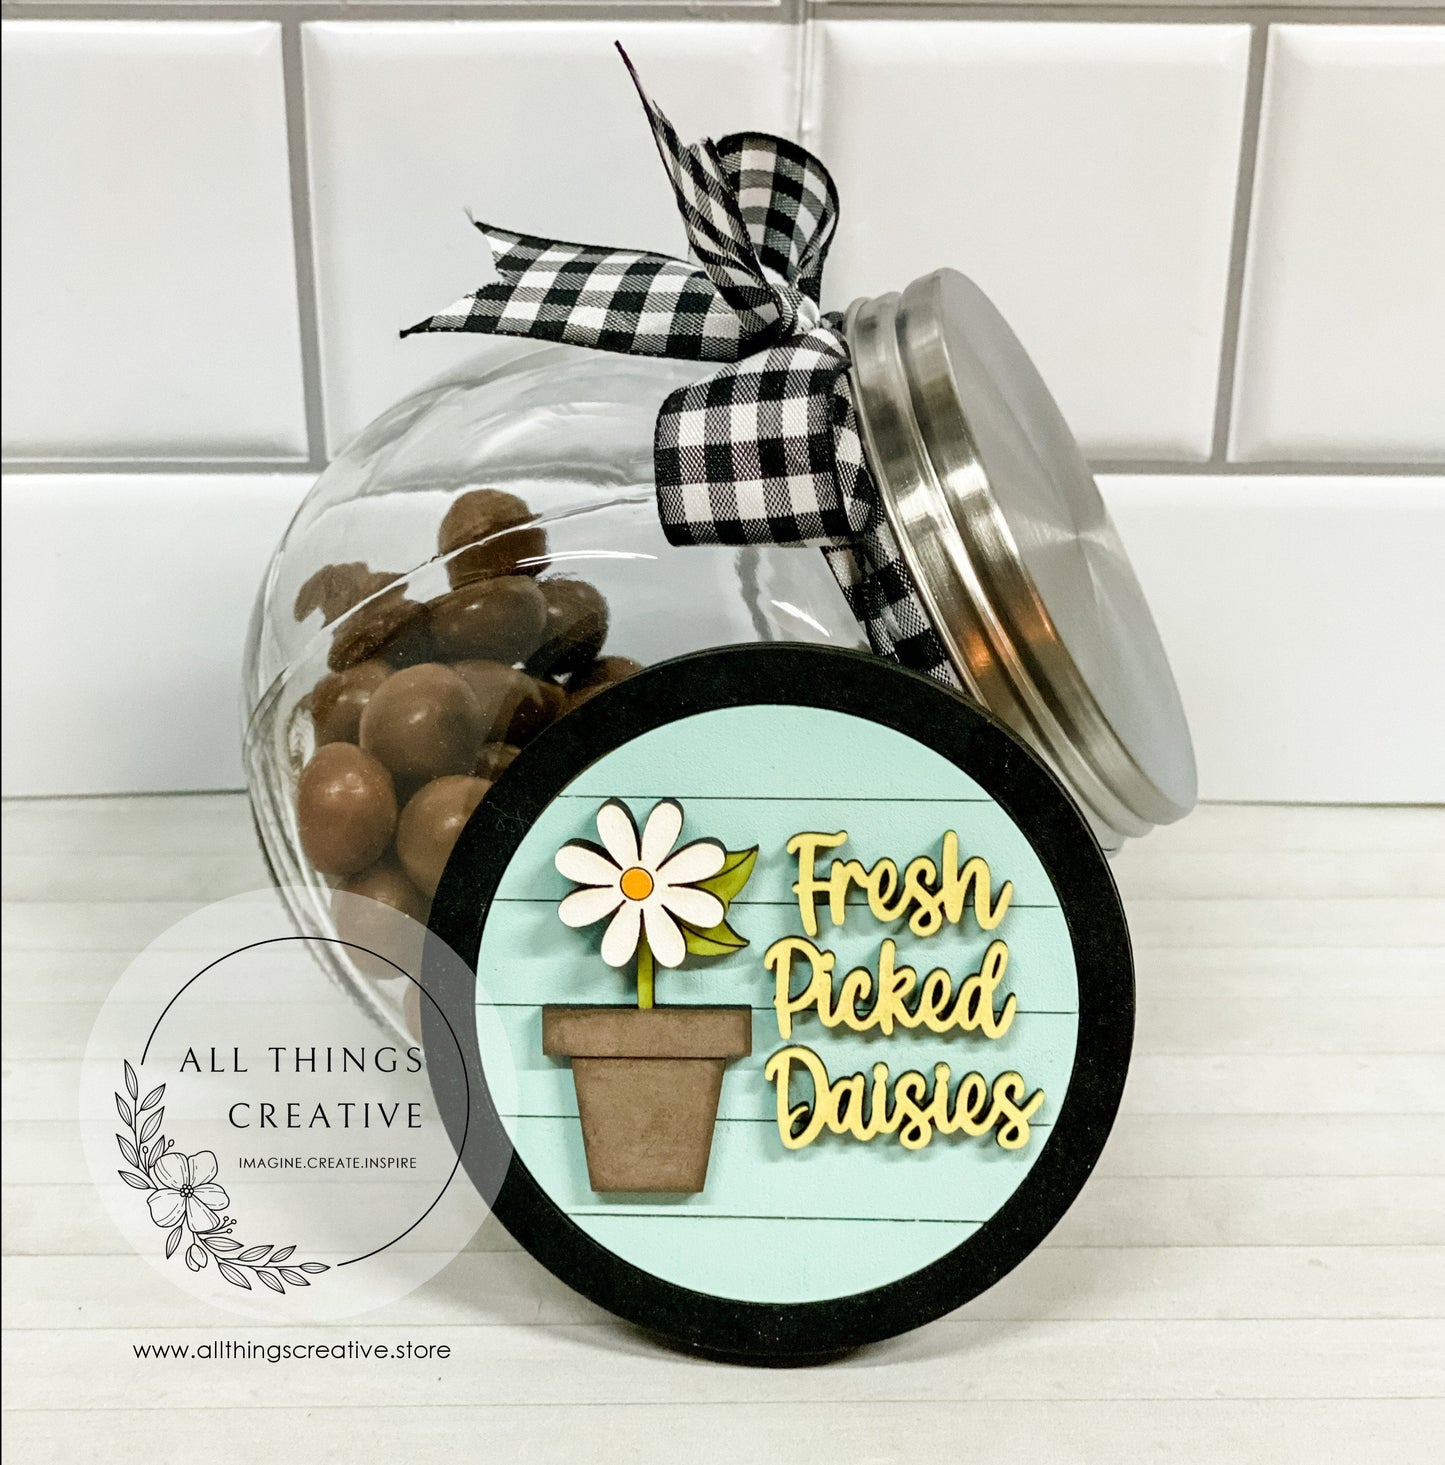 Glass Candy Jar Container with Removable Lid and a 3 inch Fresh Picked Daisies Interchangeable Circle Insert.